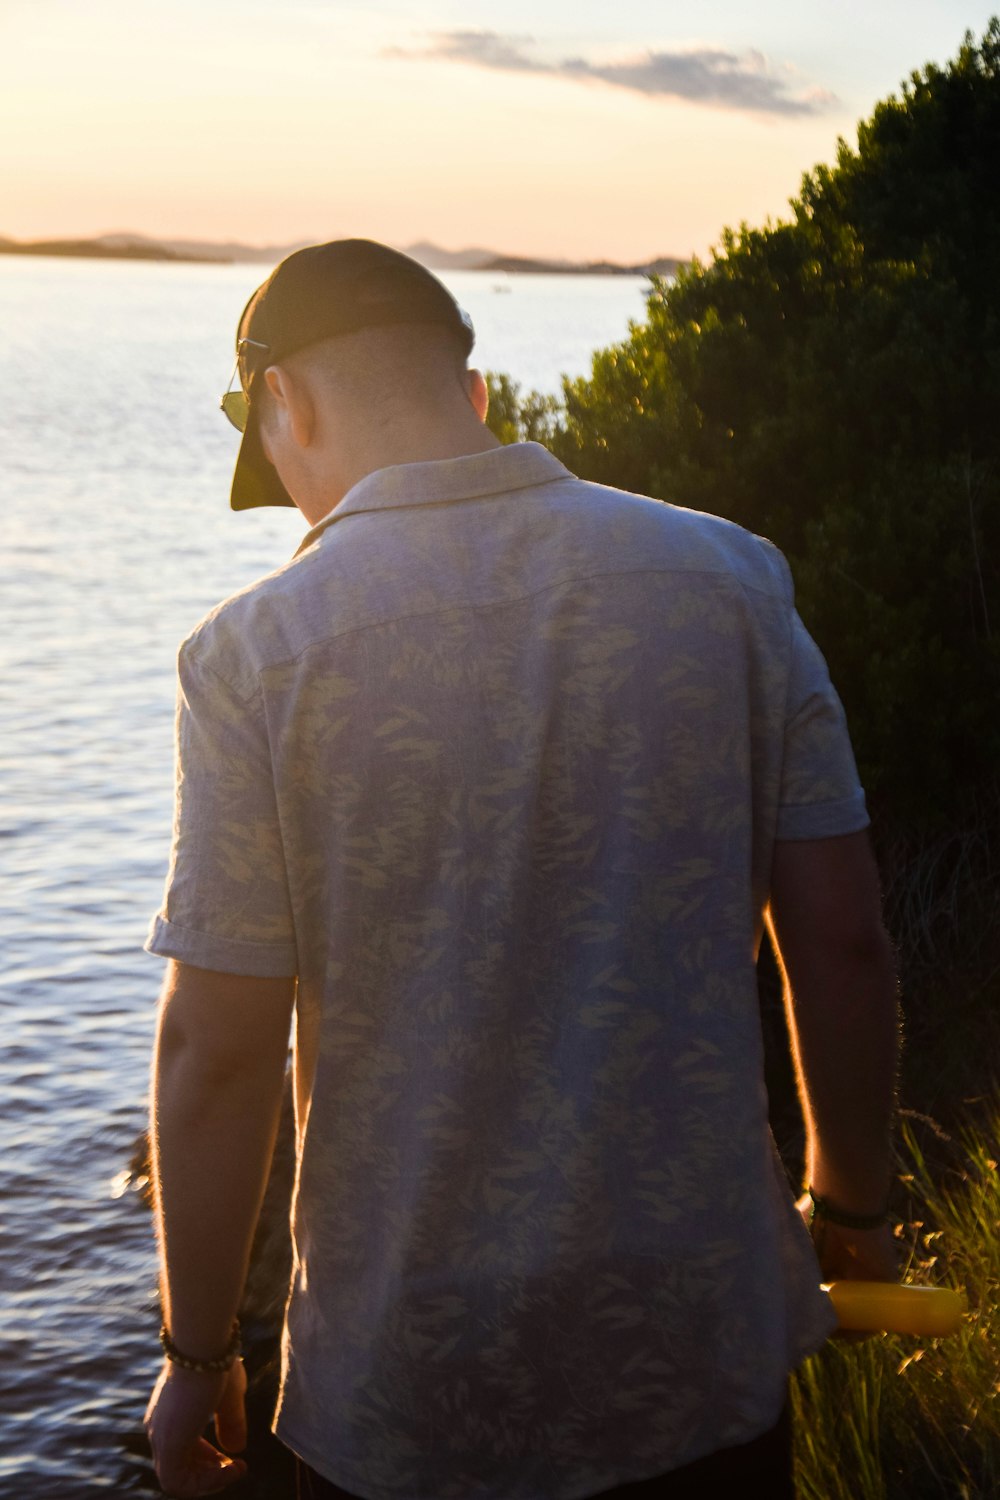 man in gray t-shirt standing near body of water during daytime